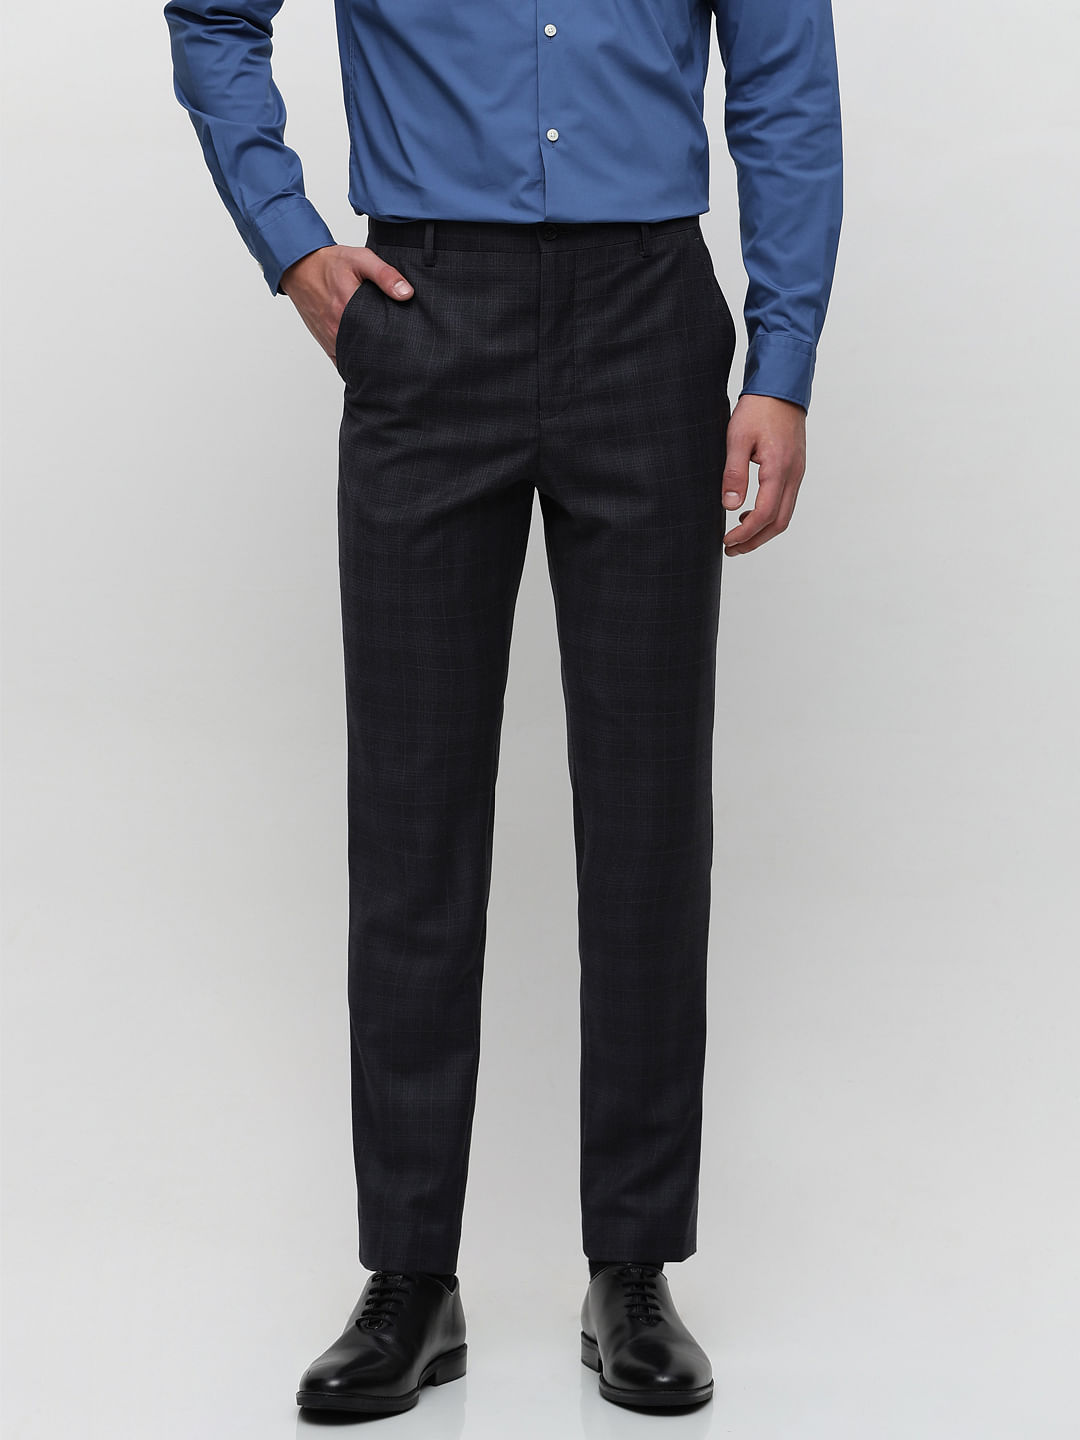 Buy Dark Blue Trousers & Pants for Men by INDEPENDENCE Online | Ajio.com